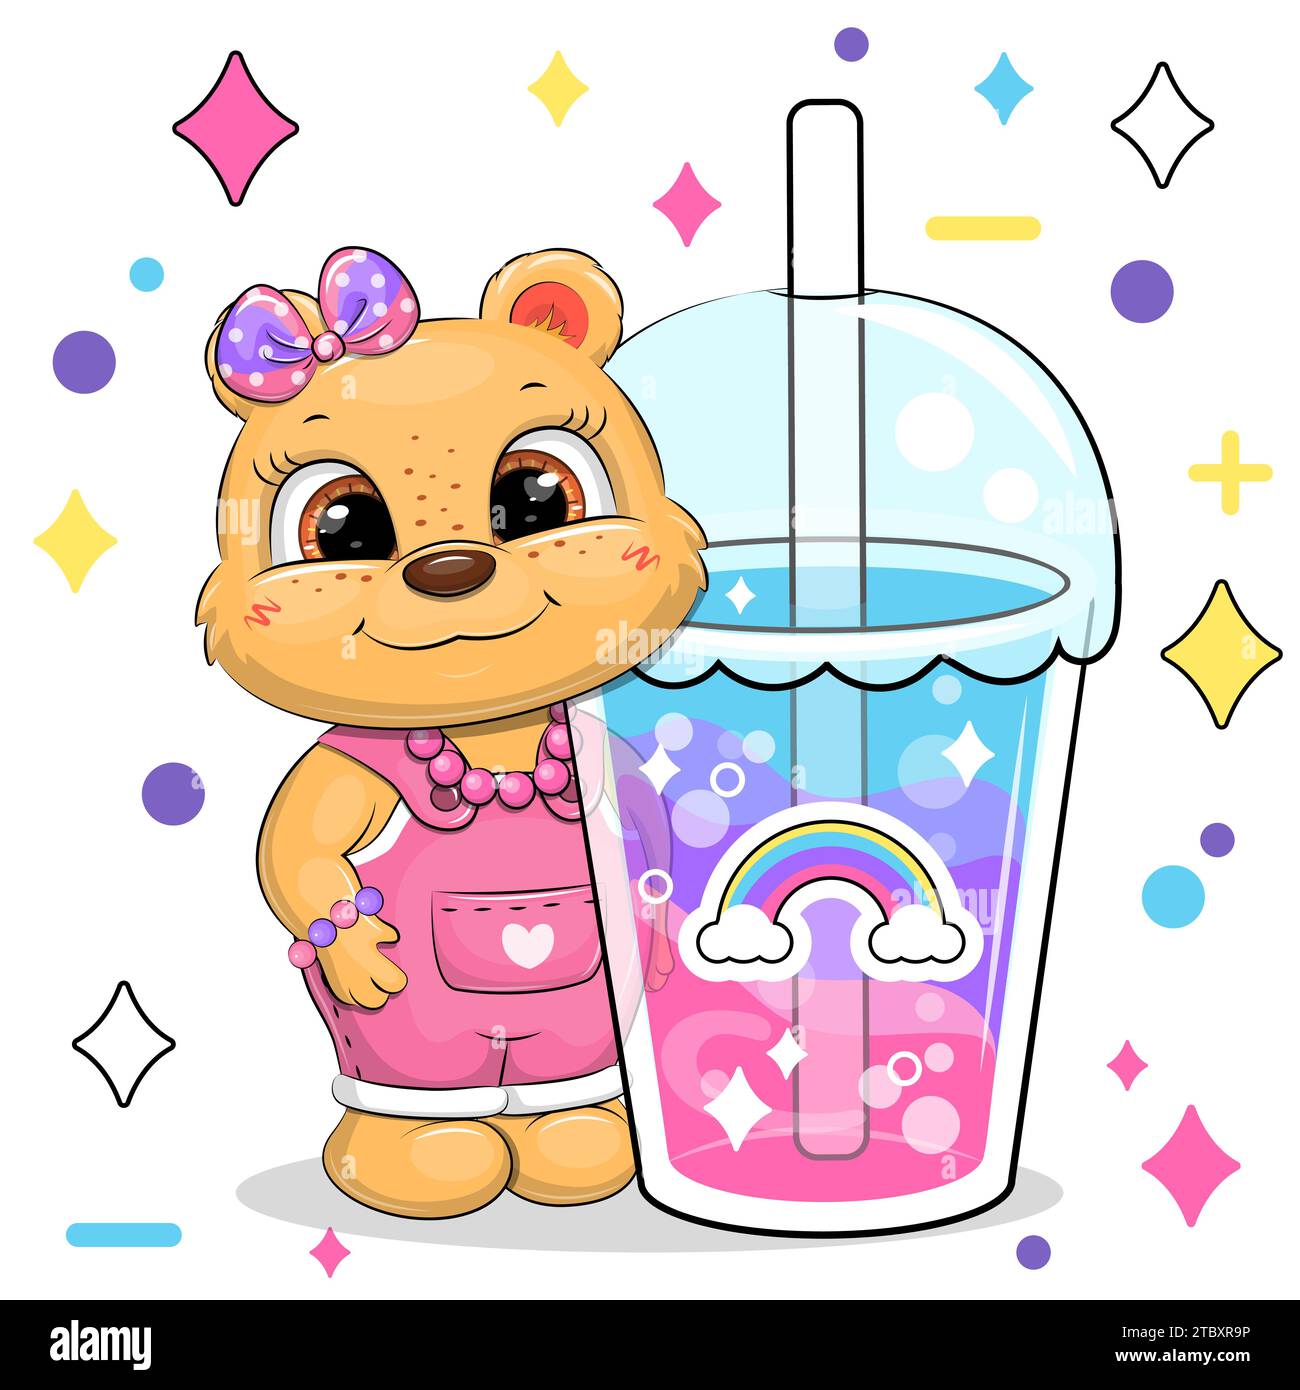 https://c8.alamy.com/comp/2TBXR9P/cute-cartoon-besr-girl-and-rainbow-drink-vector-illustration-of-animal-and-a-cup-with-colorful-water-on-a-white-background-with-stars-and-dots-2TBXR9P.jpg